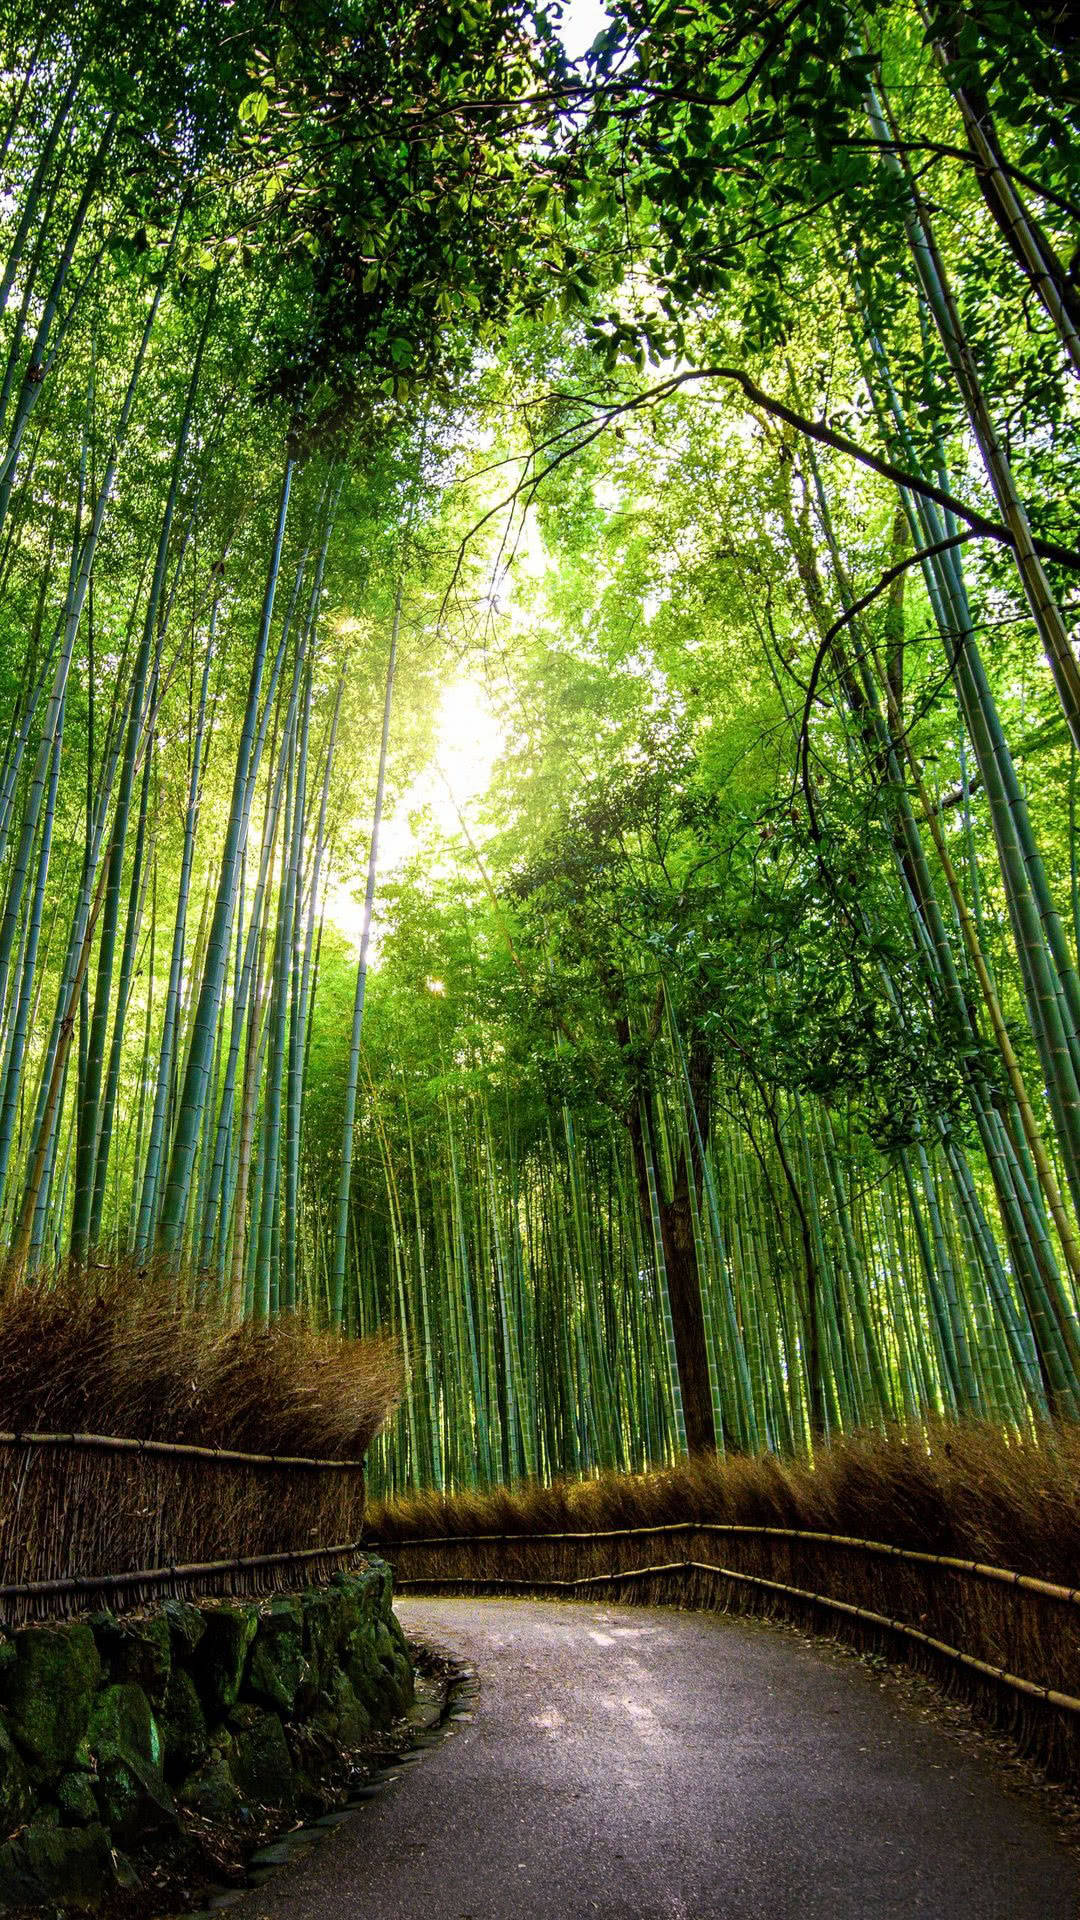 Curved Bamboo Walkway IPhone Wallpaper